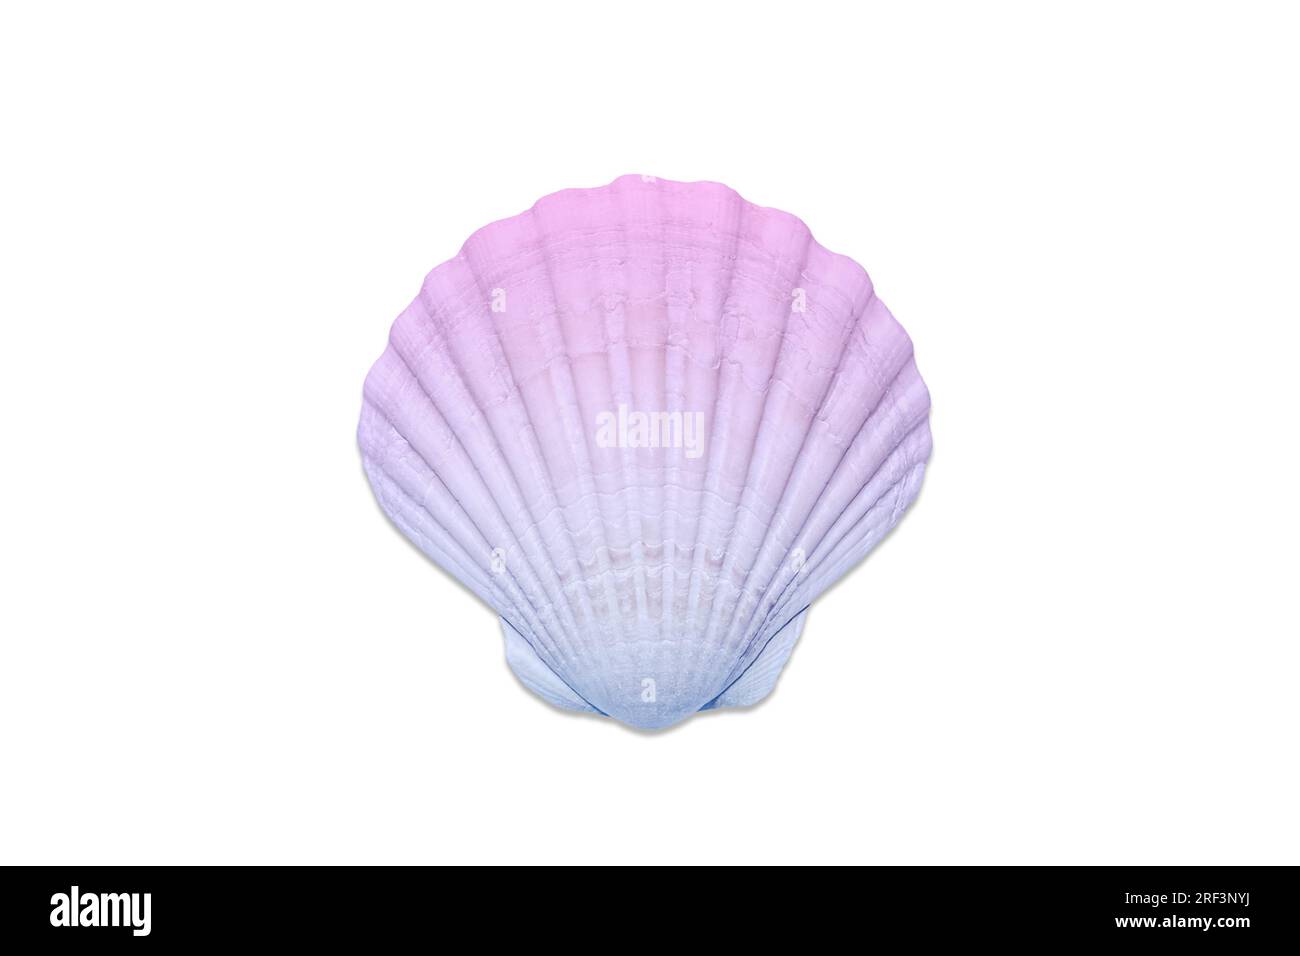 A beautiful seashell or scallop shell is toned in a blue-pink